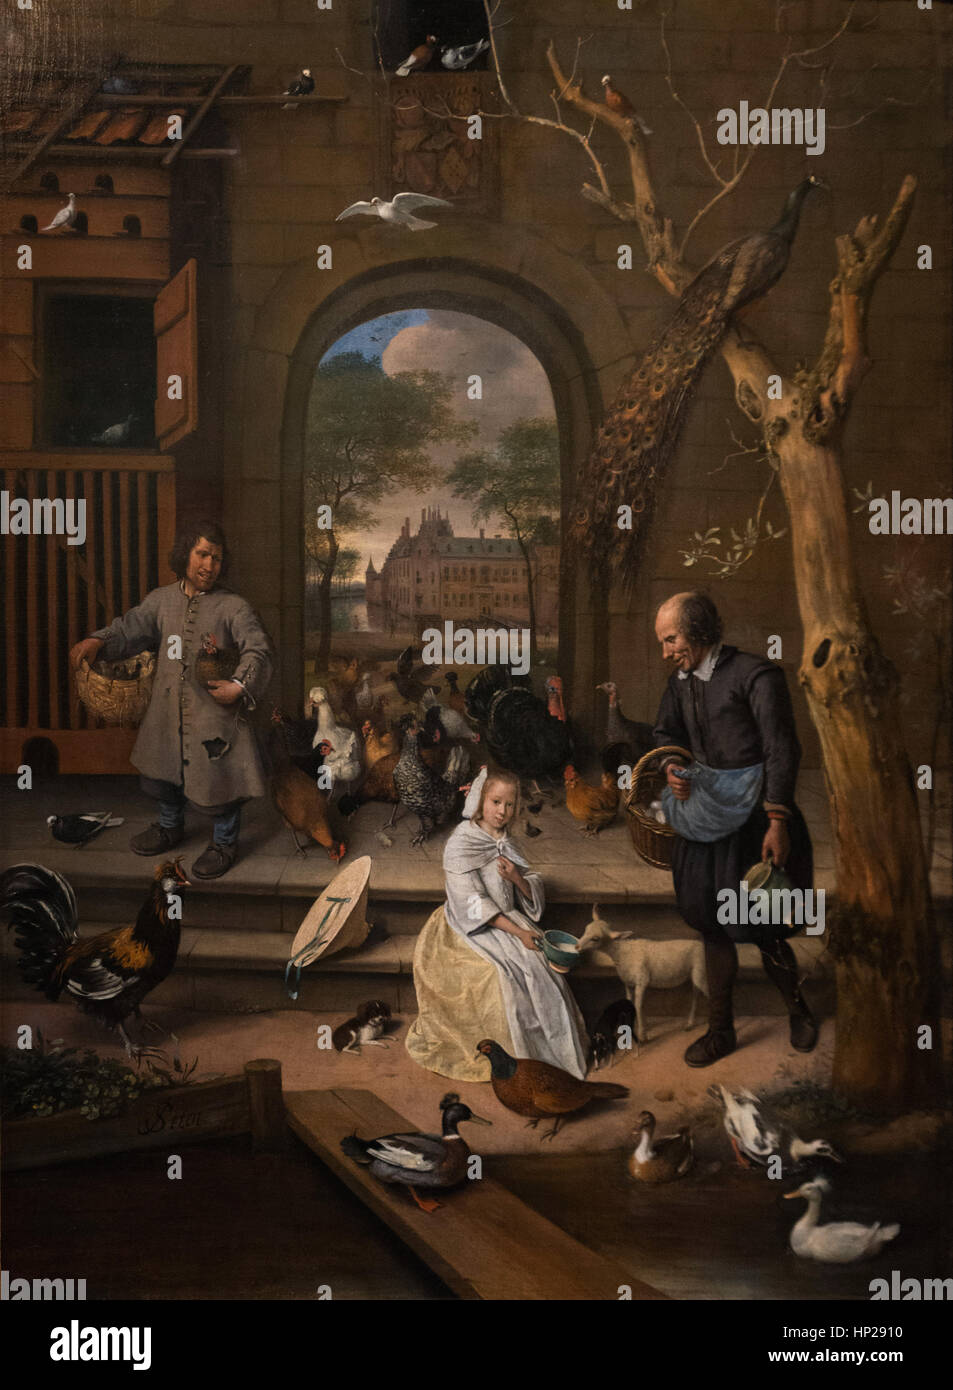 Jan Steen Portrait of Jacoba Maria van Wasseneaer known as 'The Poultry Yard' 1660 - Mauritshuis Museum The Hague Stock Photo